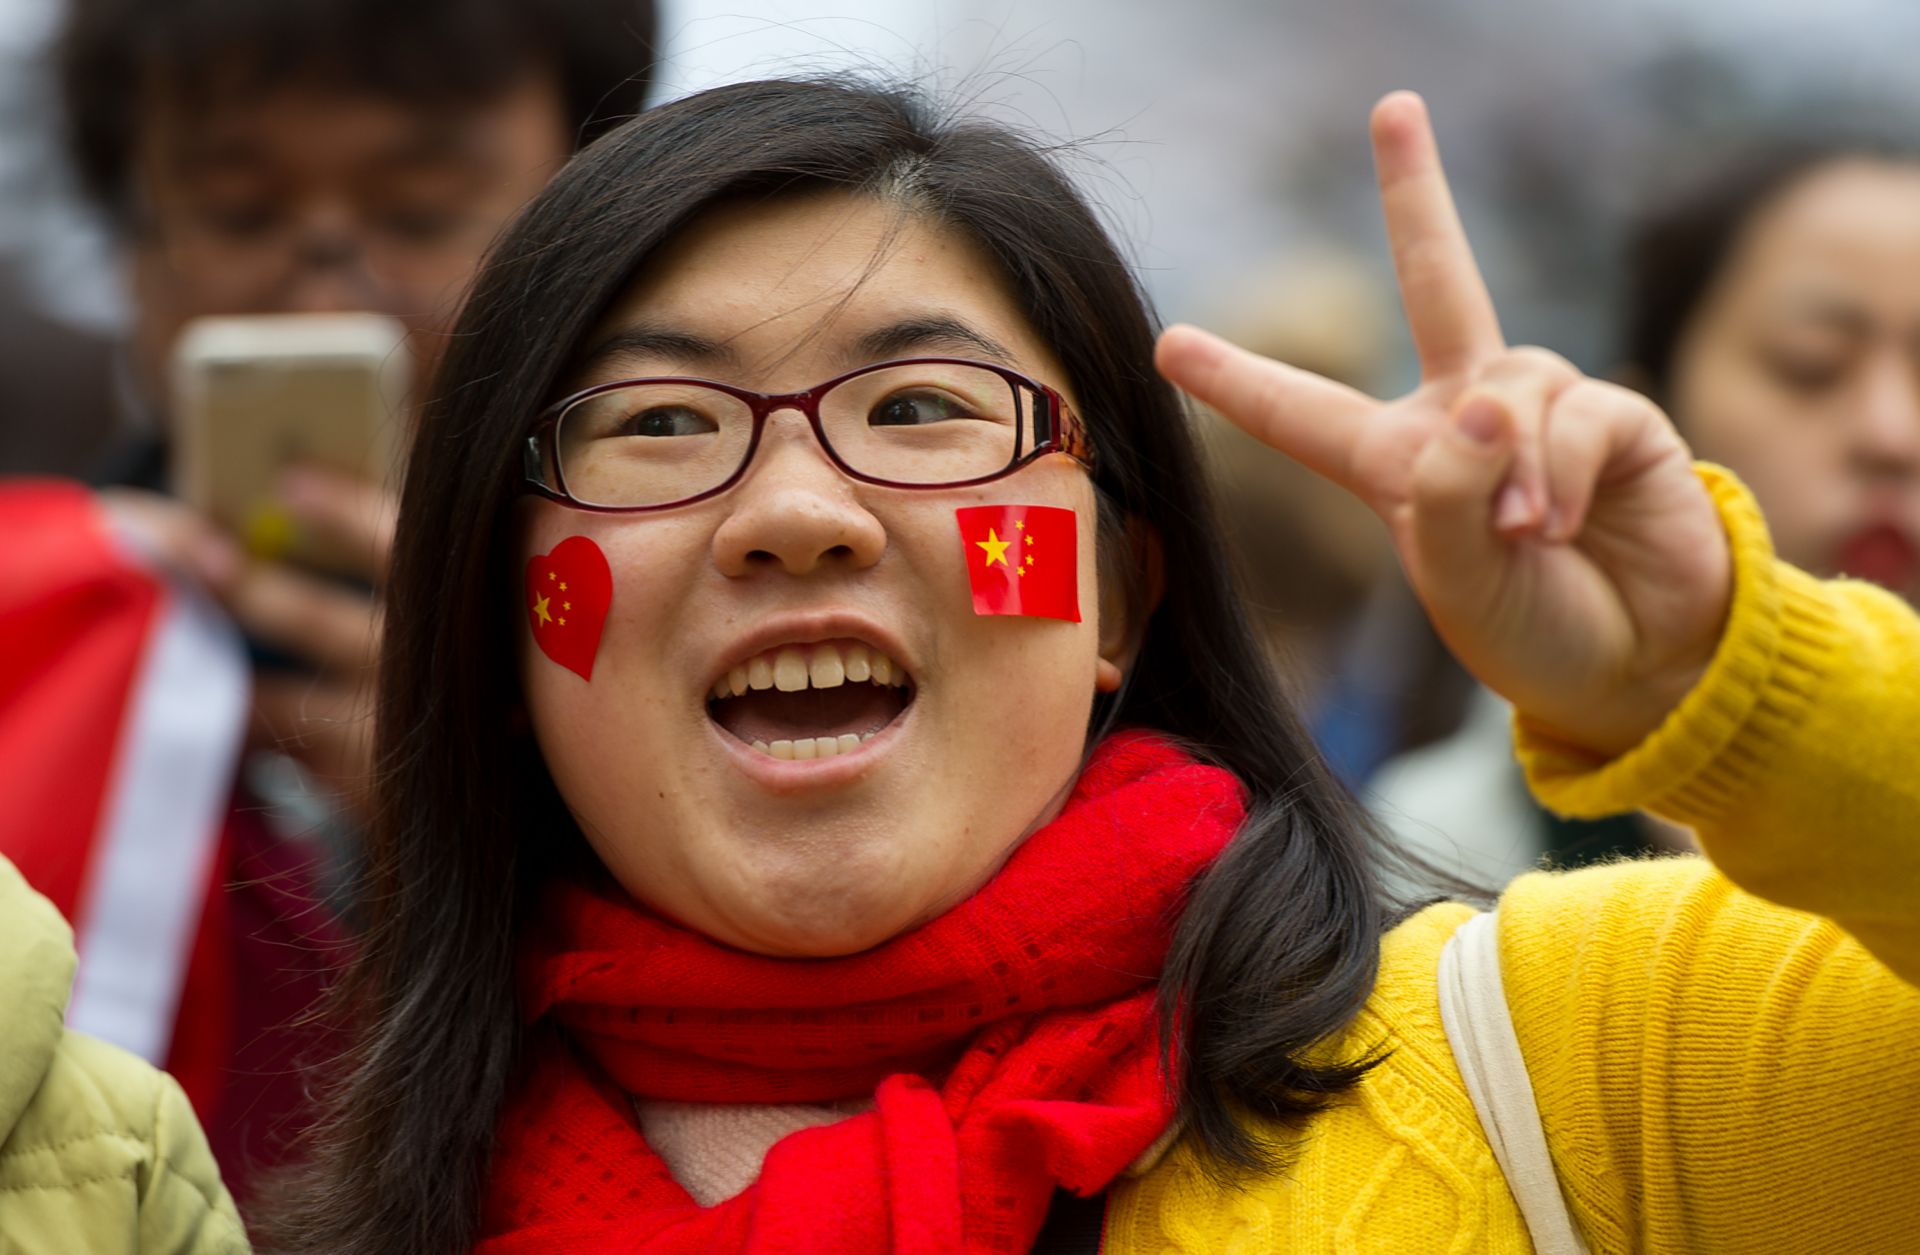 A demonstrator shows support for the Chinese government at a counterprotest held in response to an Amnesty International demonstration over human rights abuses and online censorship in China.